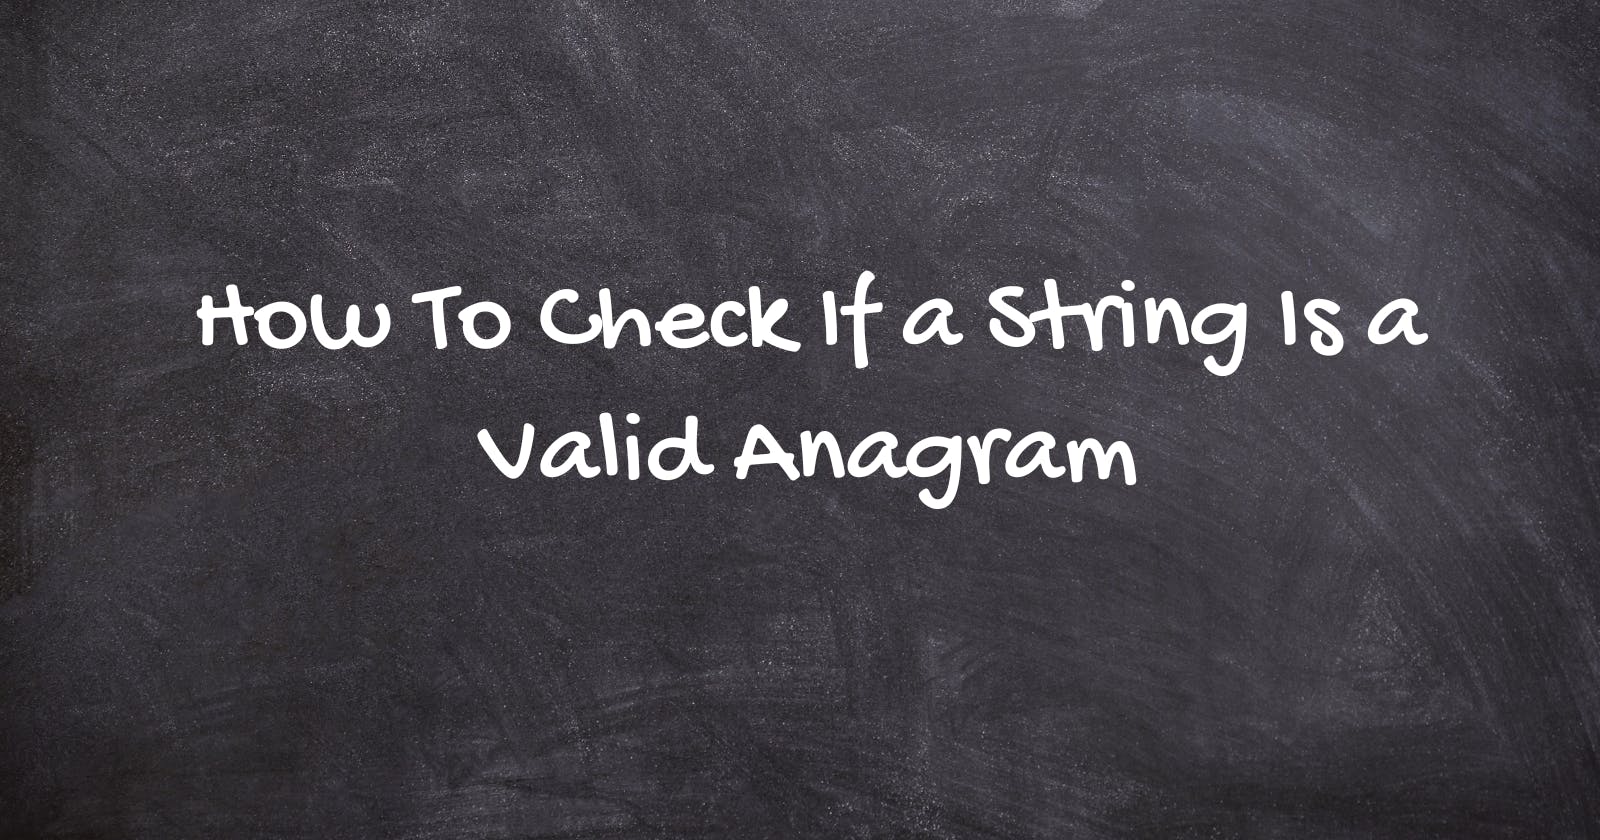 How To Check If a String Is a Valid Anagram